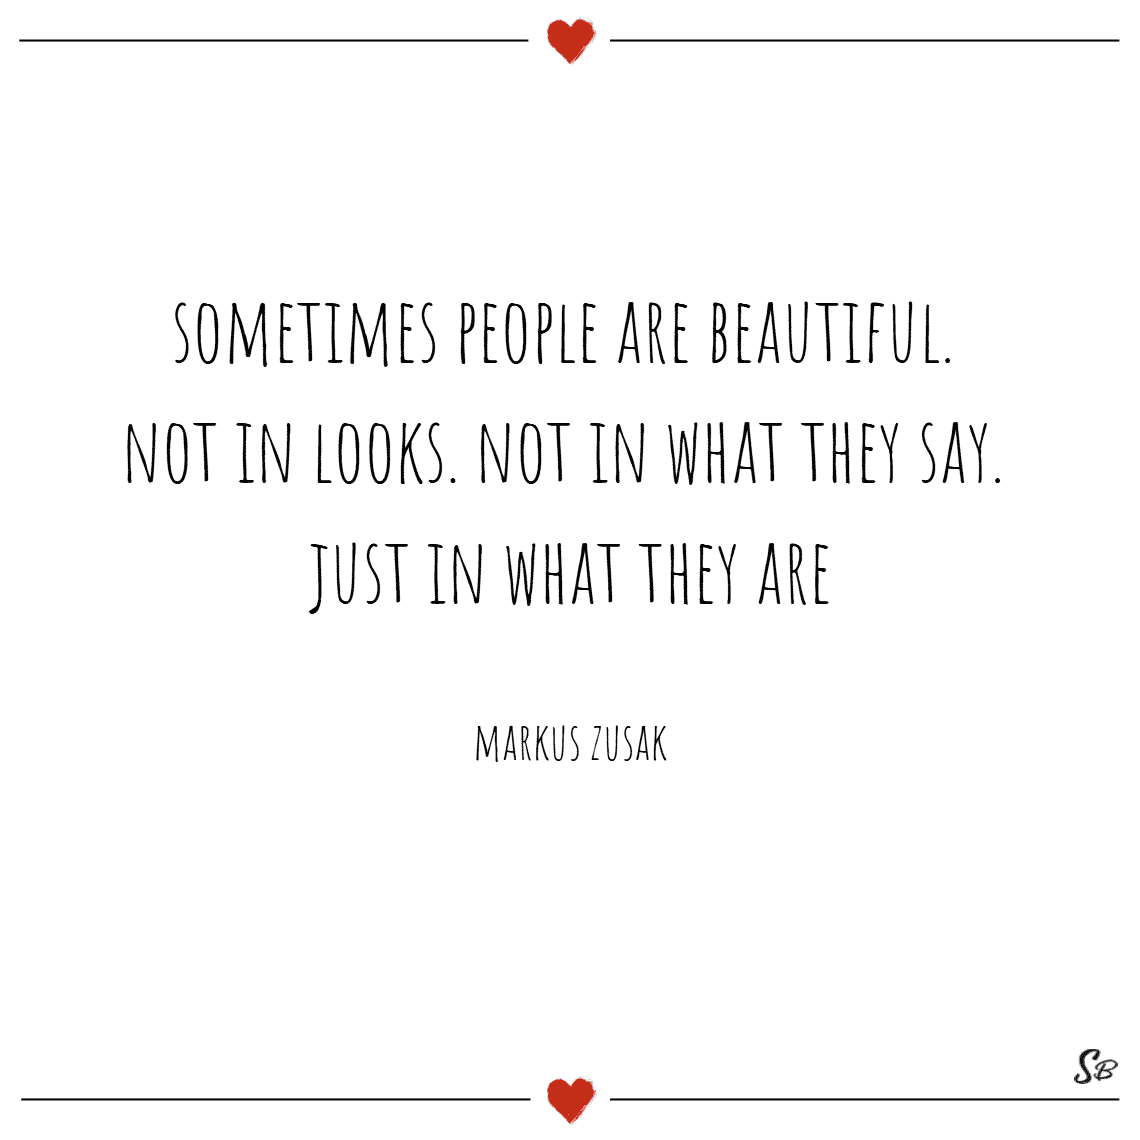 What is beauty of the heart?